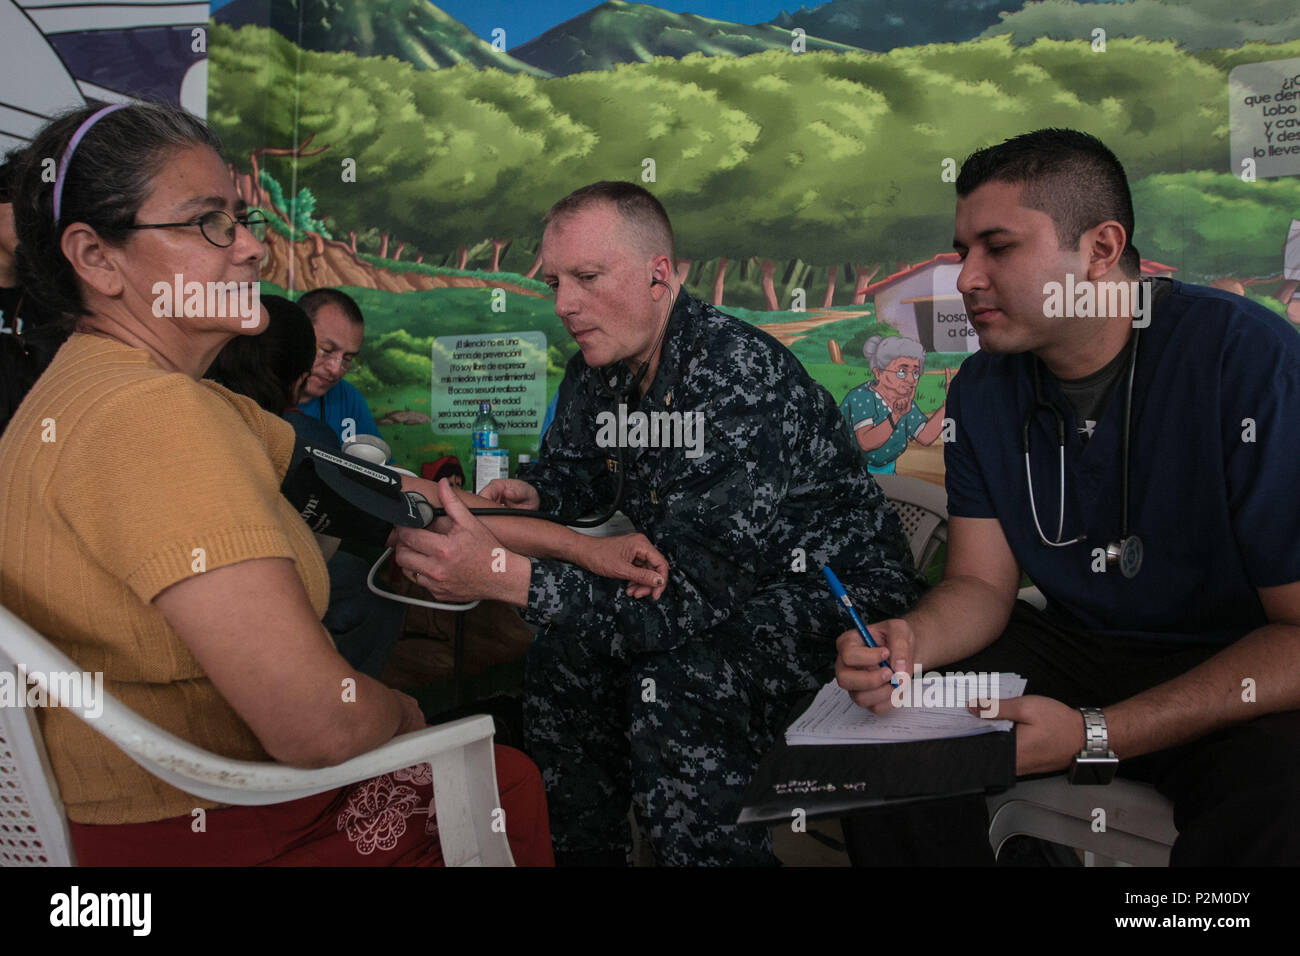 AHUACHAPAN, El Salvador (Sep. 8, 2016) - U.S. Navy Cmdr. Tony Silvetti, a gynecologist assigned to Naval Hospital Camp Lejeune, assists Dr. Angol Jose Gustavo M.D., a health worker with Operation Blessing’s Medical Brigade, check a patient’s vitals at a temporary treatment site in Ahuachapán, El Salvador during Southern Partnership Station 2016 (SPS-16).  Operation Blessing’s Medical Brigade is a non-for-profit mobile patient care unit established to provide medical service to those affected by natural disaster and render aid to rural areas. SPS-16 is an annual series of U.S. Navy deployments  Stock Photo